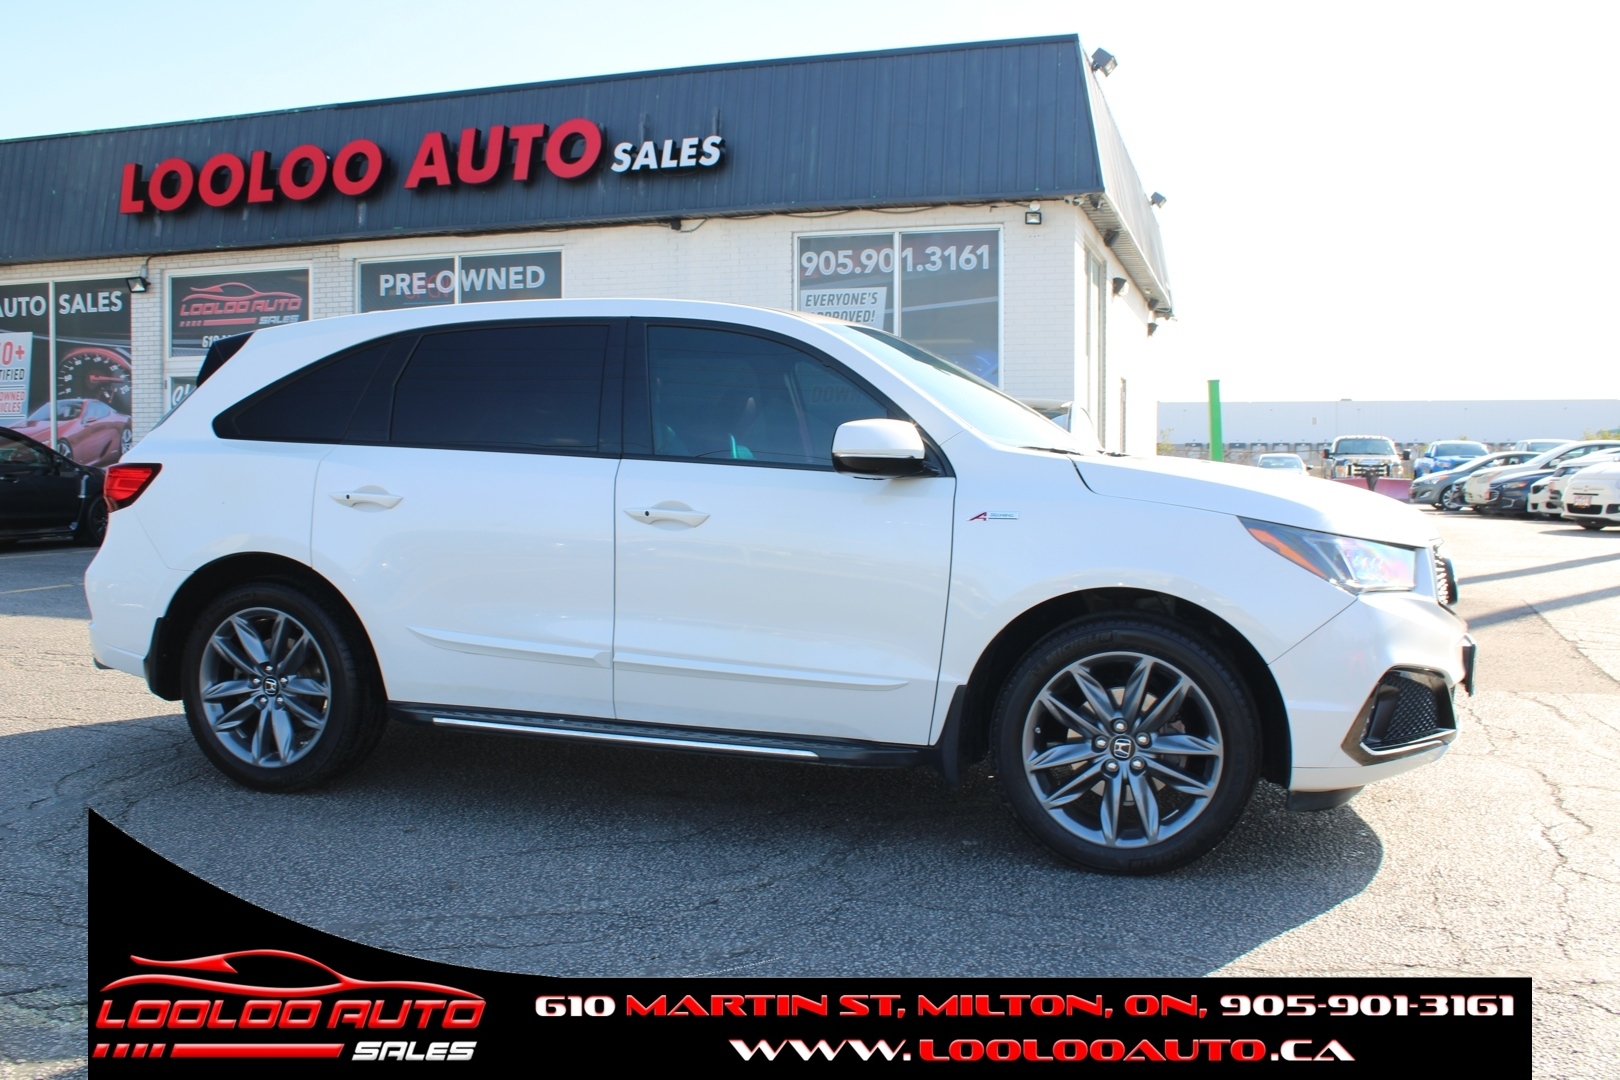 2019 Acura MDX SH-AWD A-Spec 7 Passenger Navigation $99/Weekly Ce